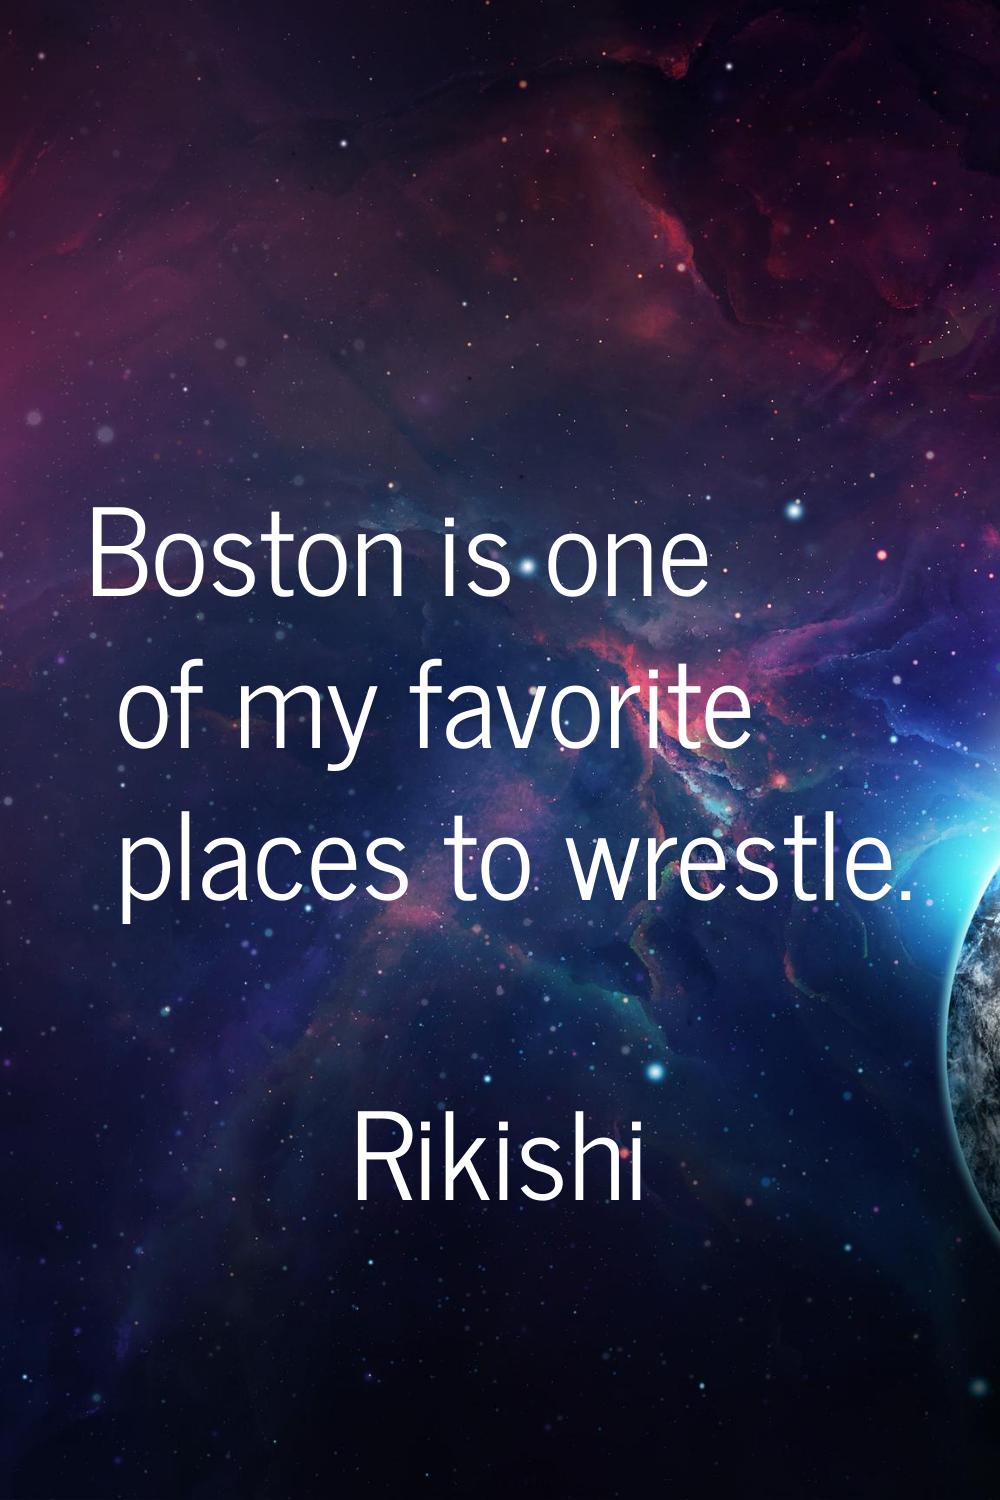 Boston is one of my favorite places to wrestle.